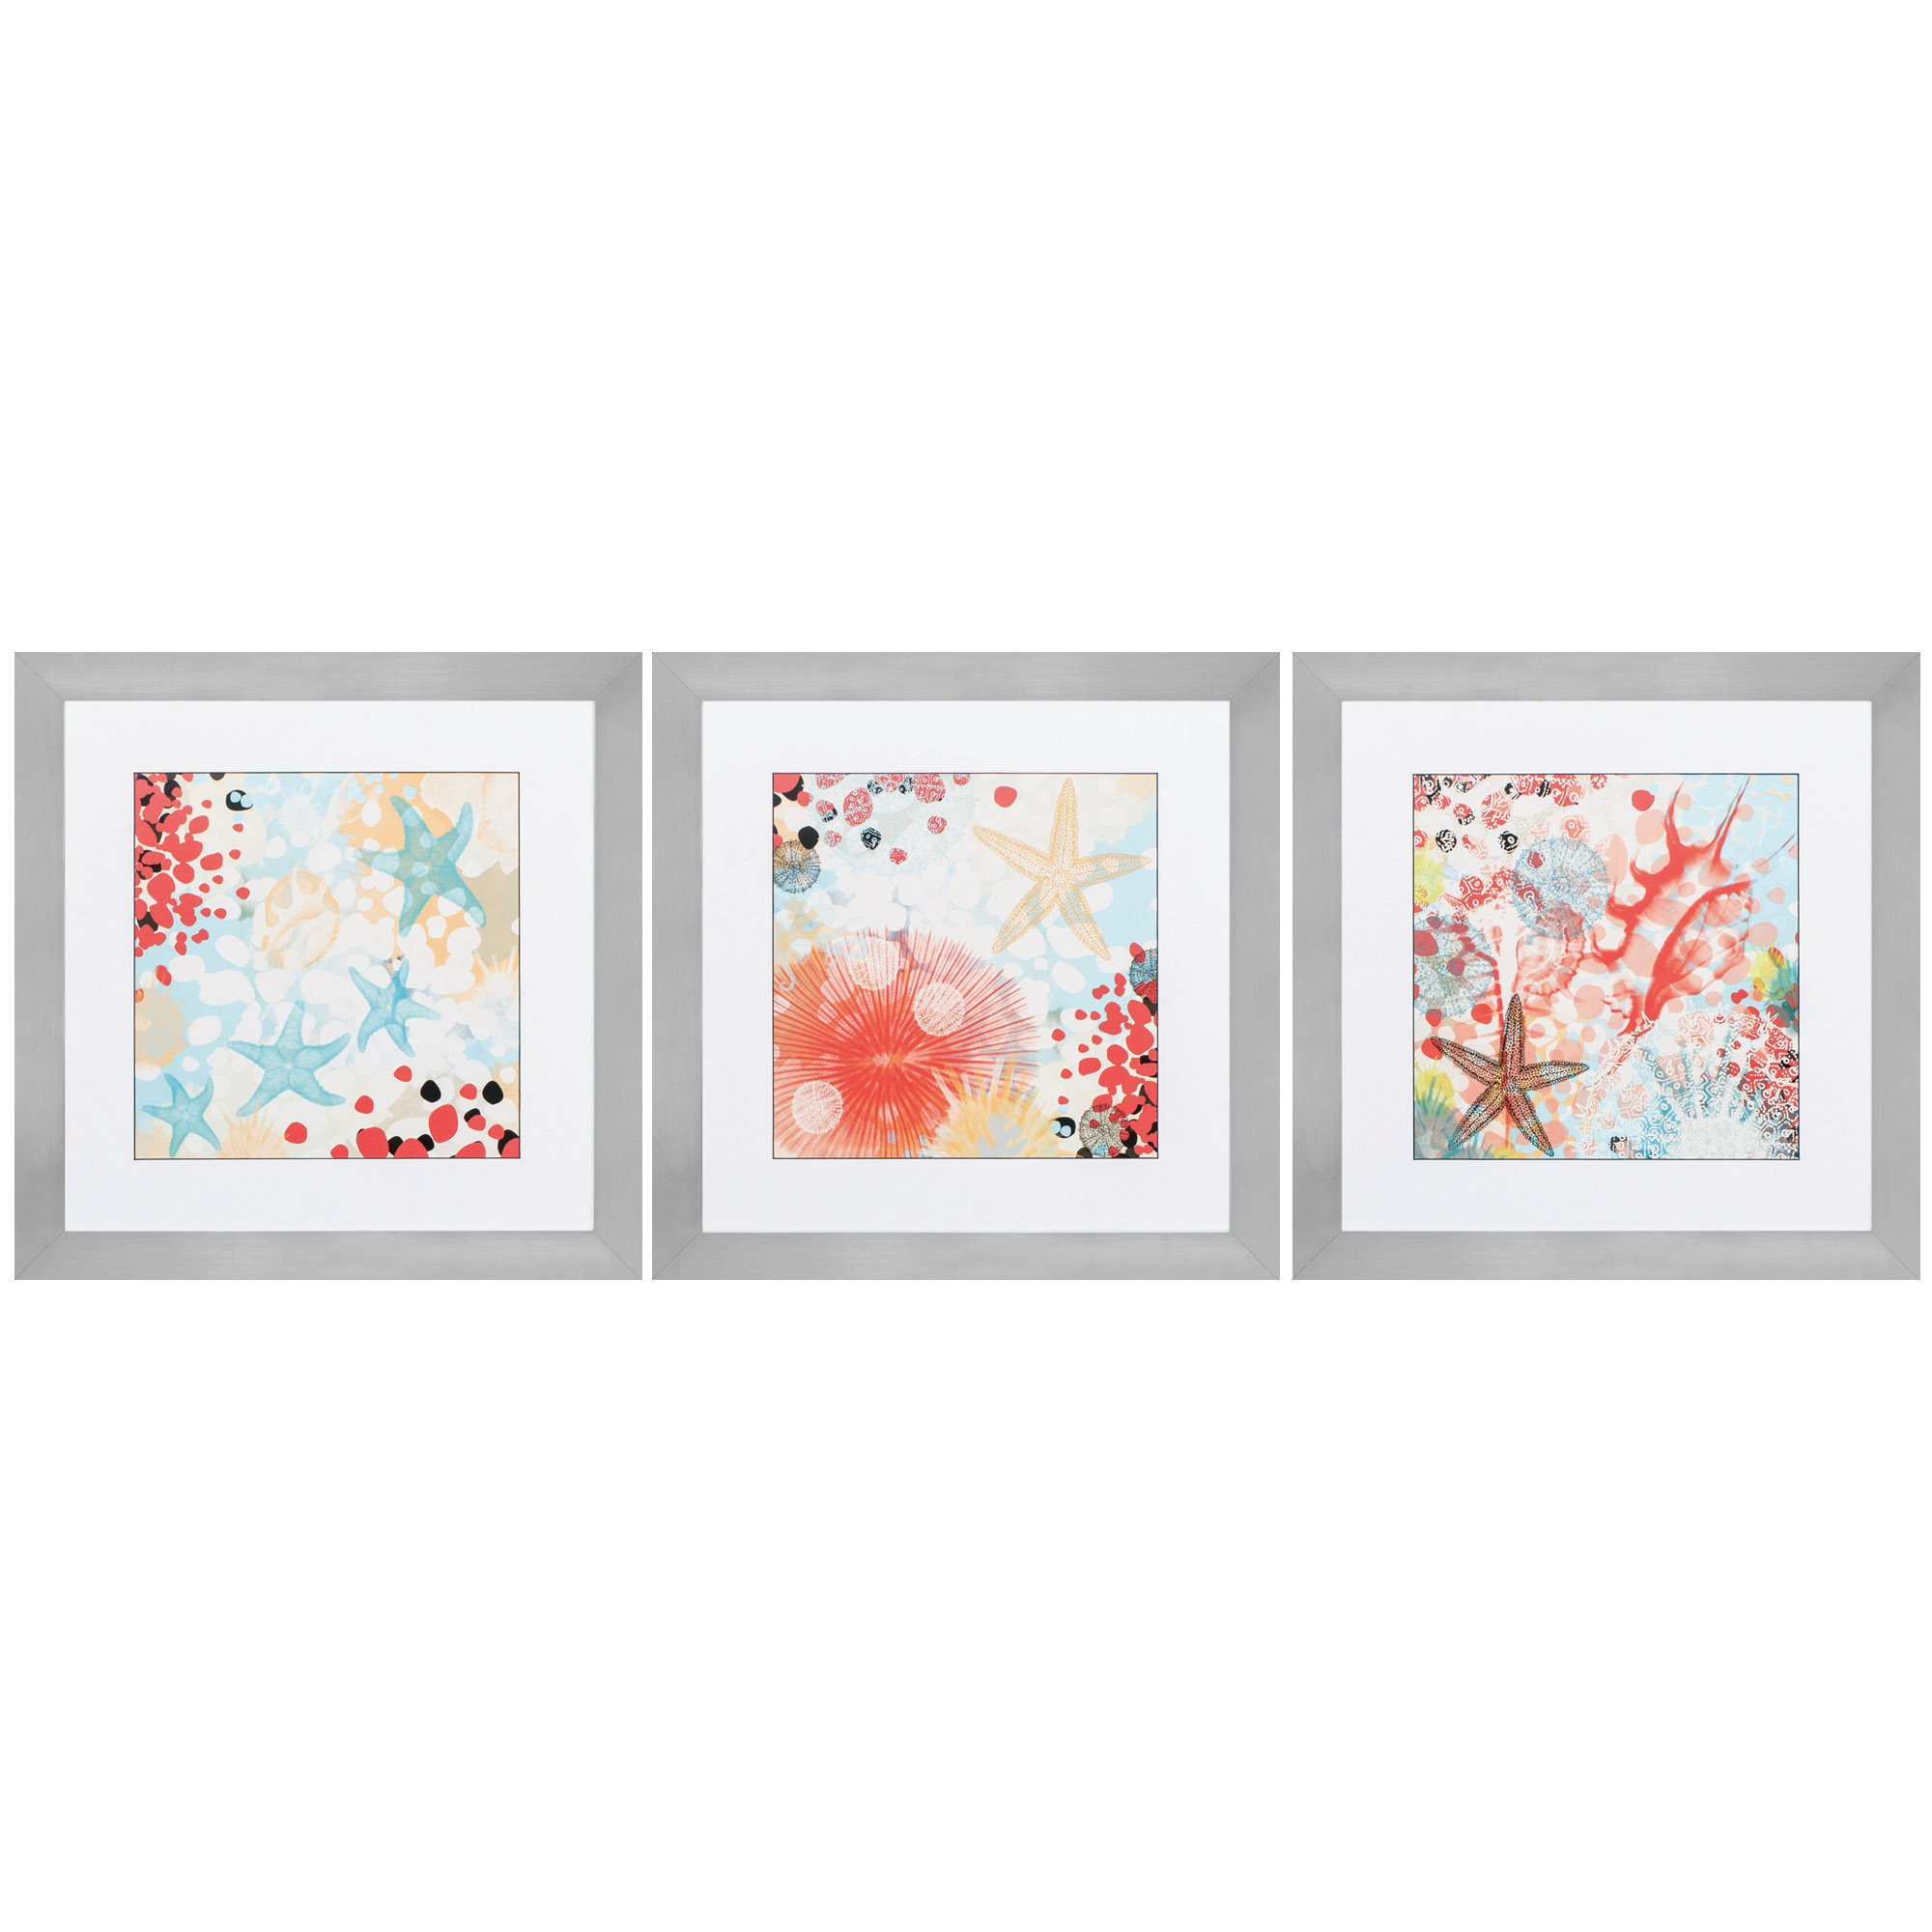 26" X 26" Silver Frame Exotic Sea Life (Set of 3)